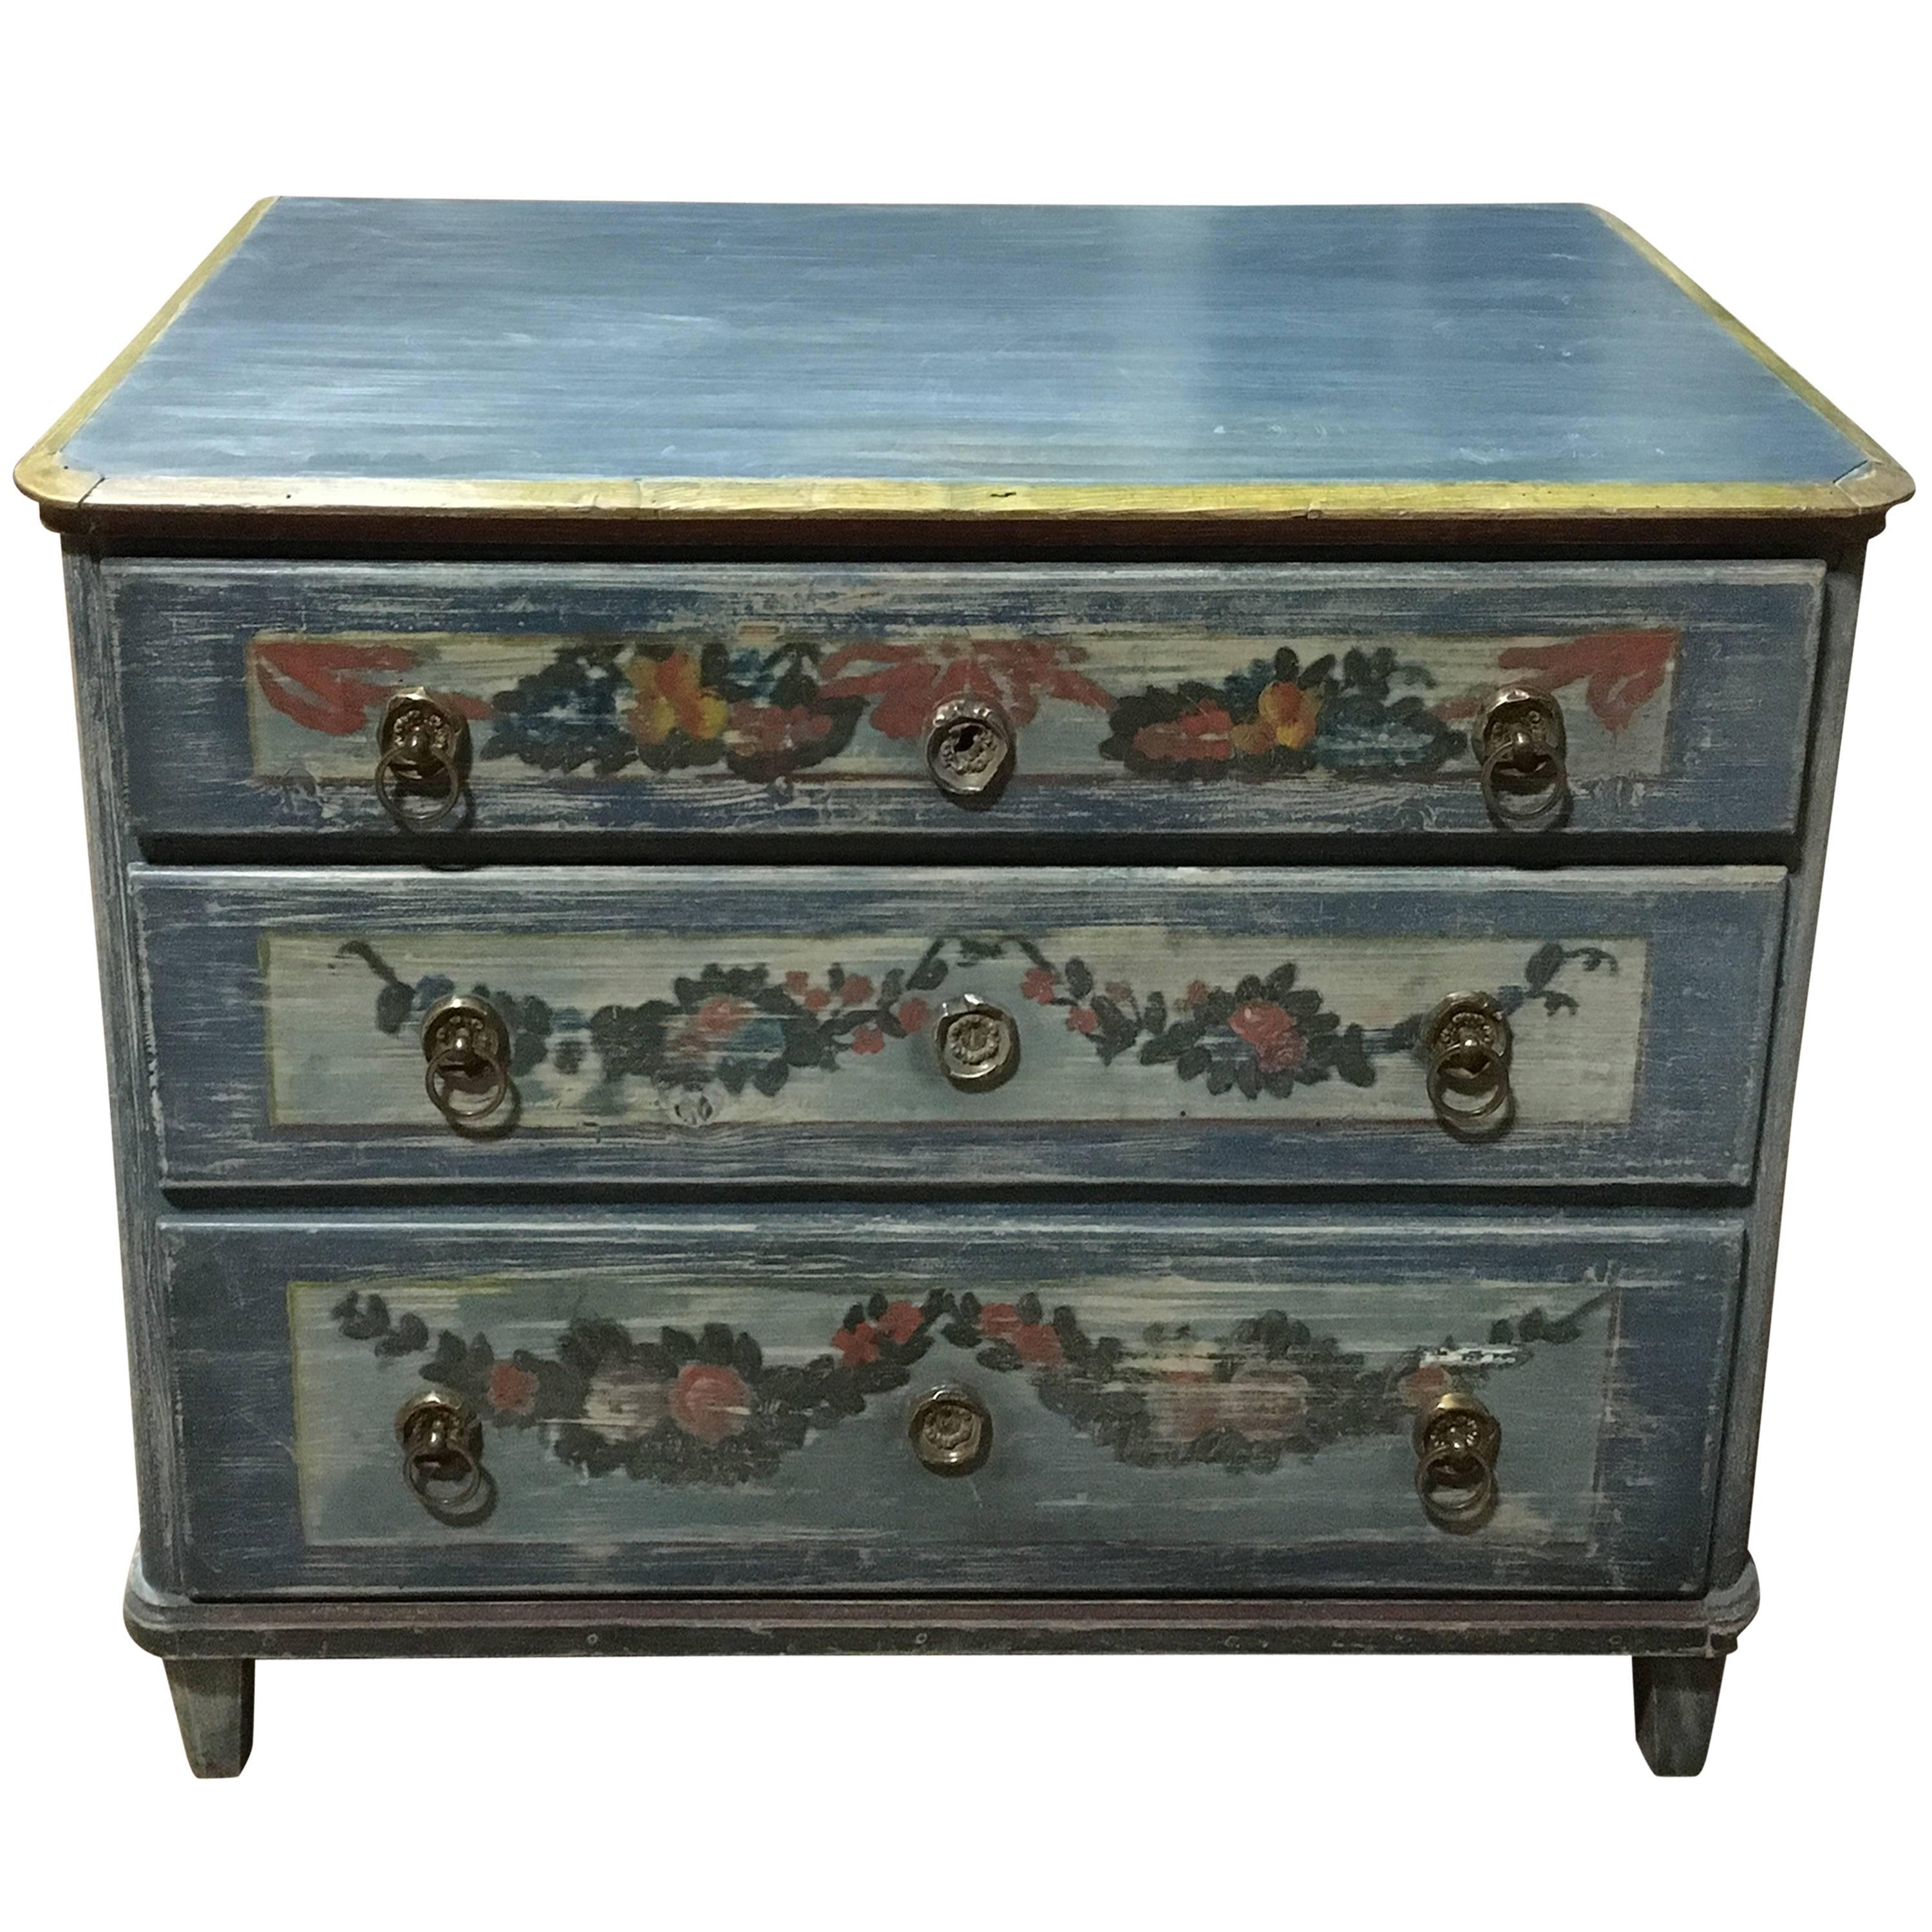 Early 19th Century Painted Commode, Continental